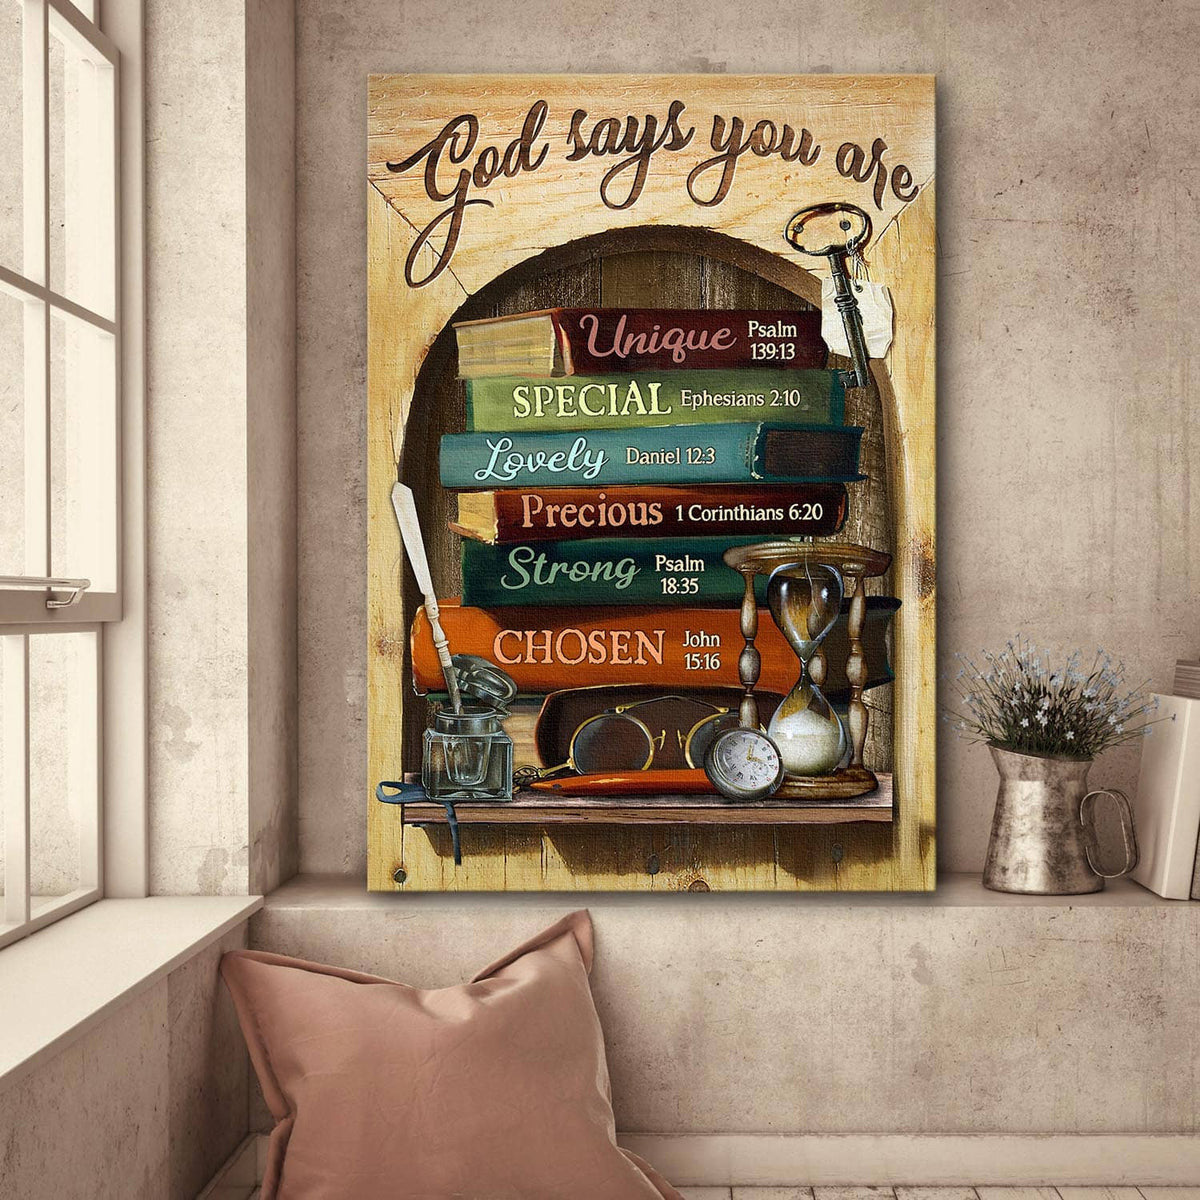 Jesus Portrait Premium Wrapped Canvas - Book, Glasses, God says you are canvas- Gift for Christian, Friends, Family